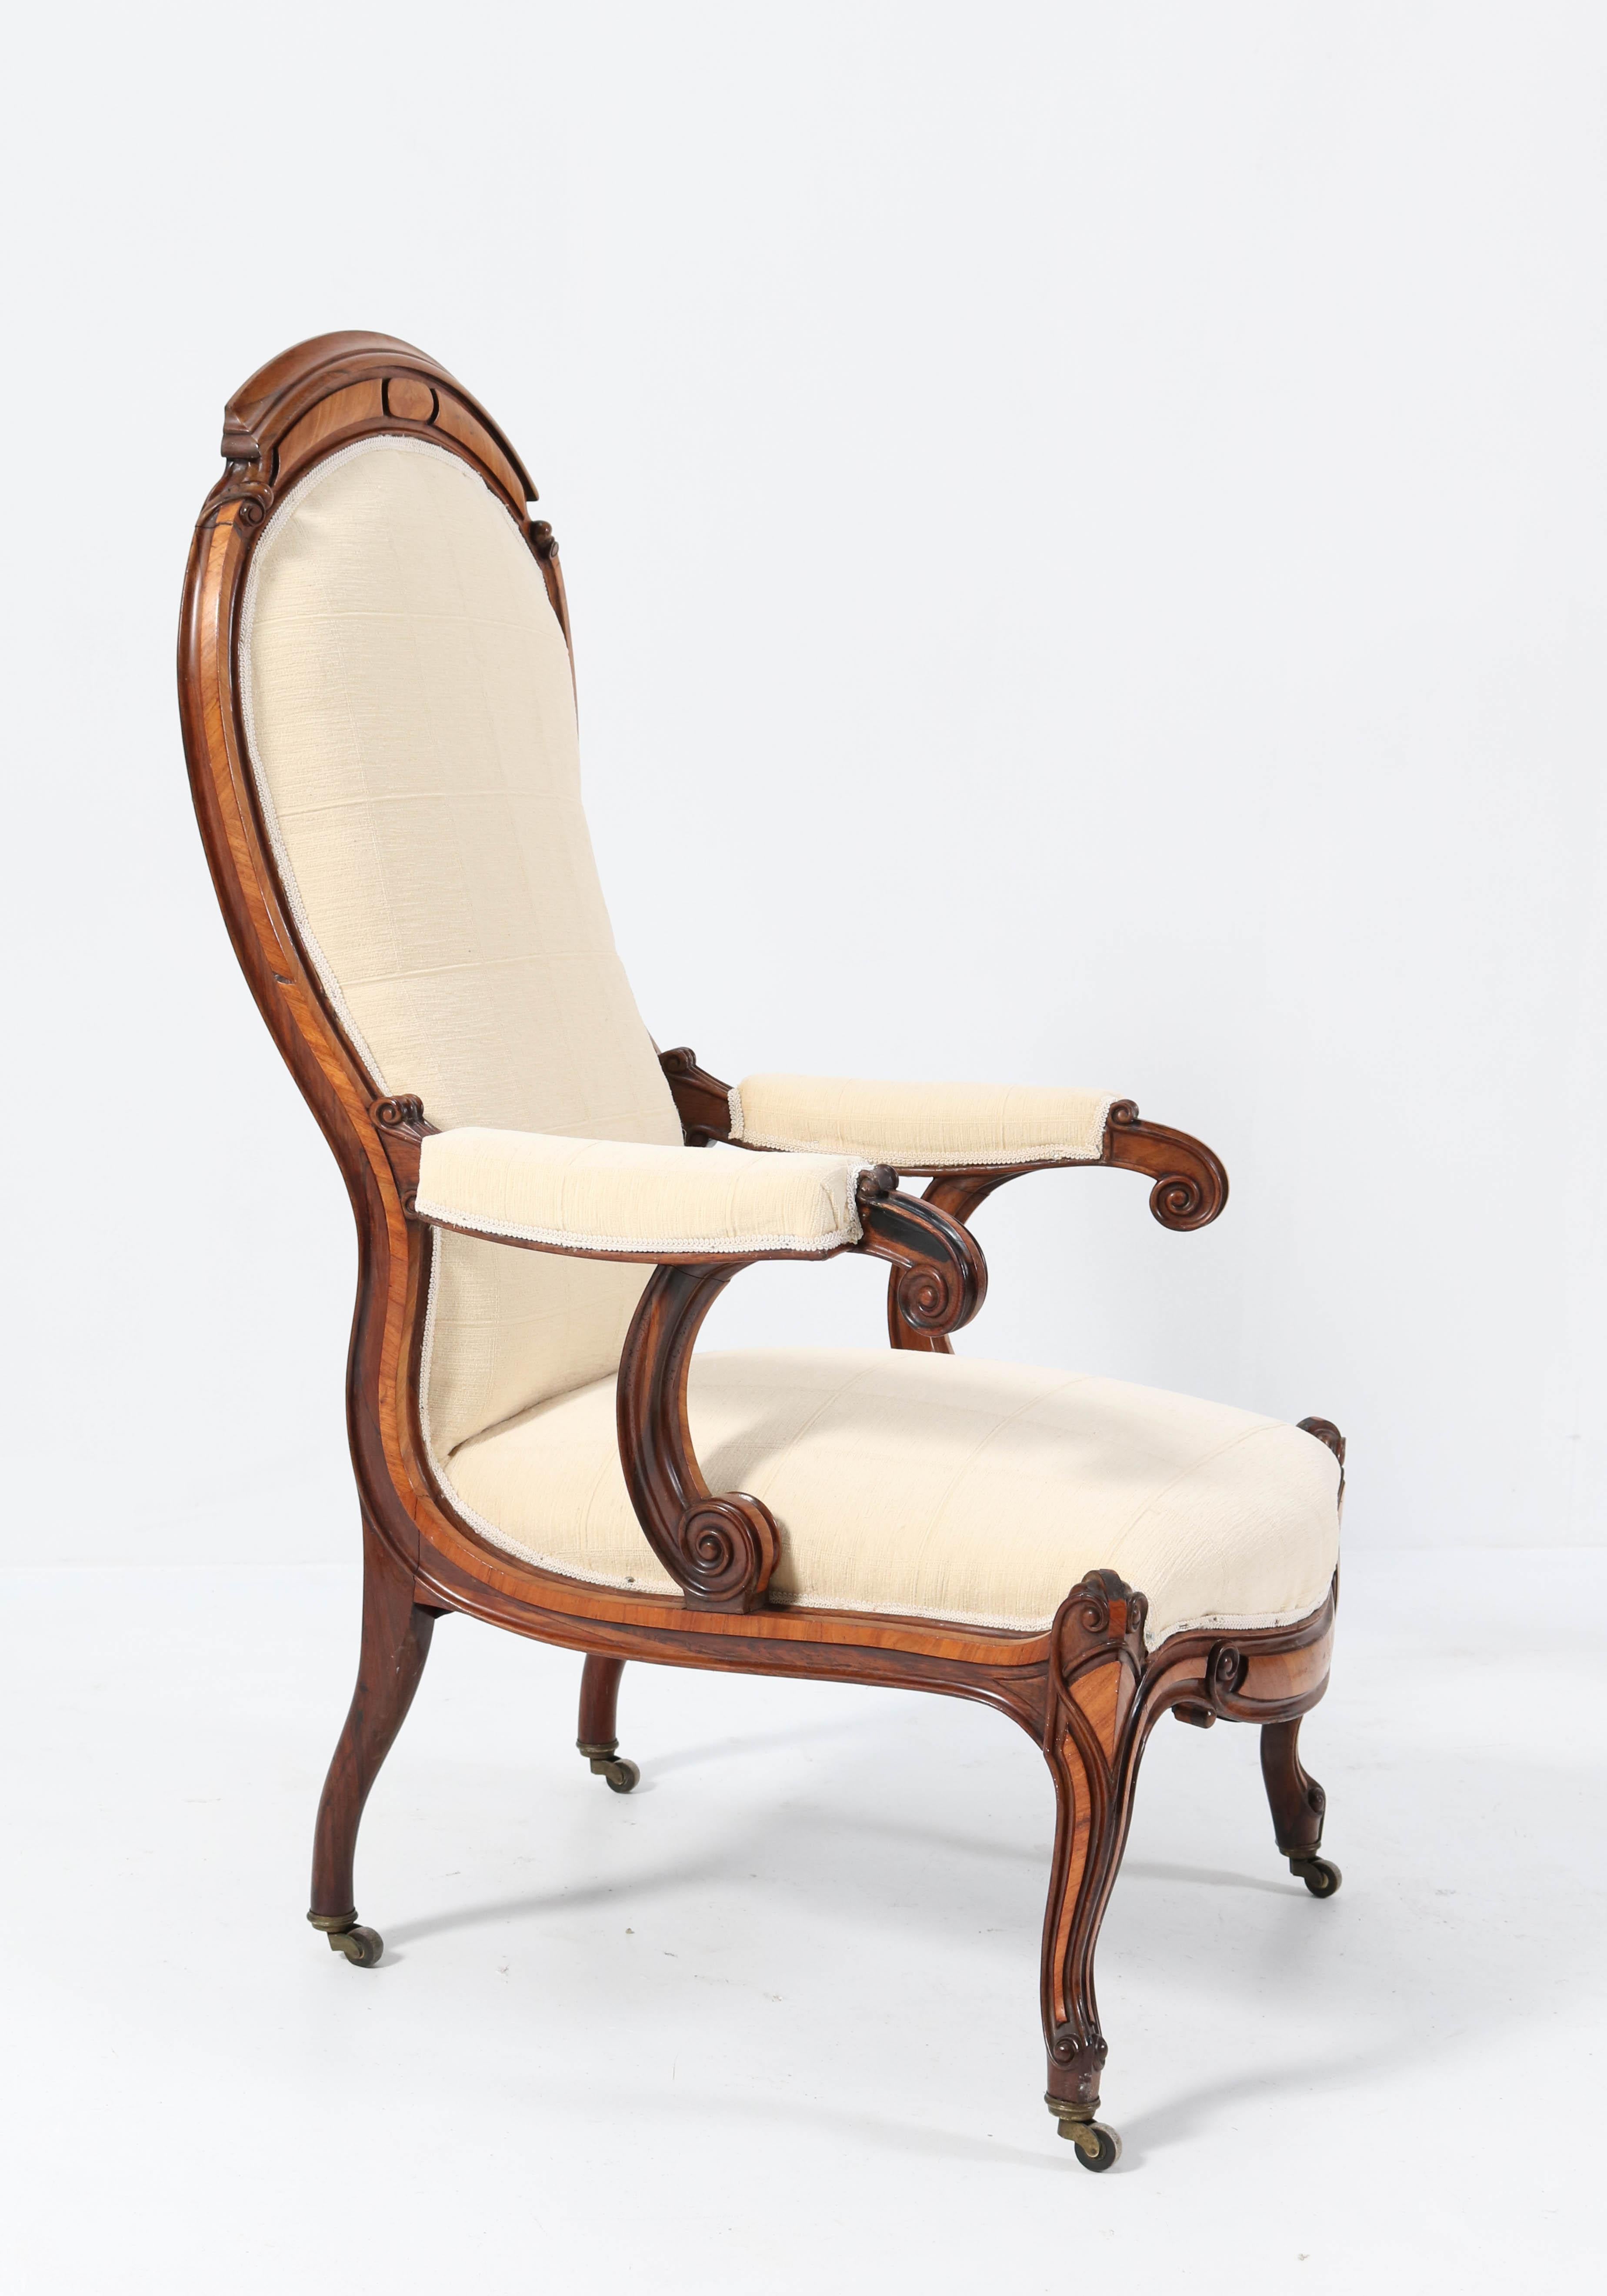 Satinwood Victorian High Back Armchair or Voltaire Chair, 1860s For Sale 5